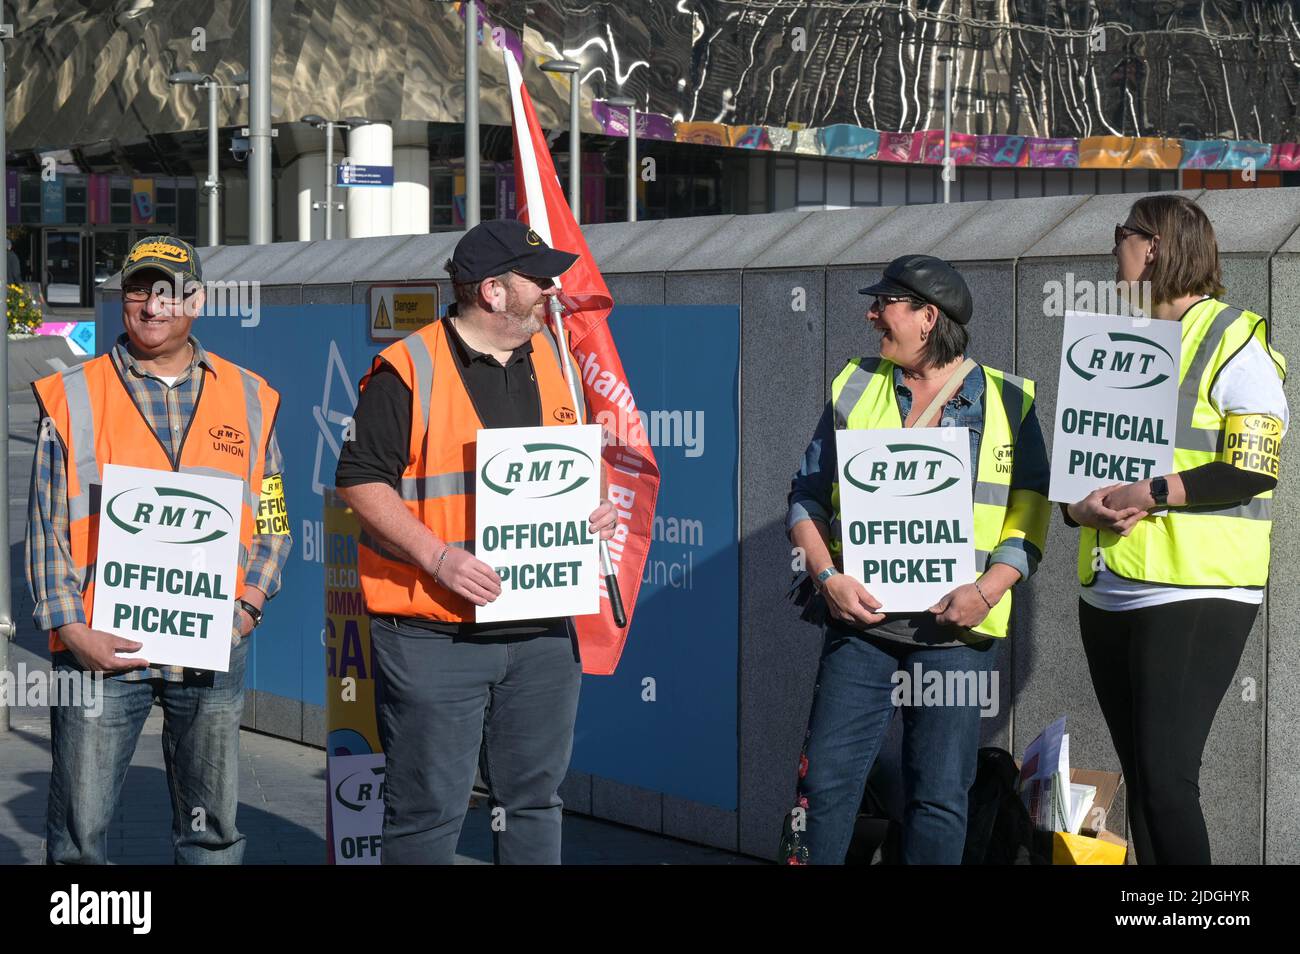 New Street, Birmingham, England, June 21st 2022. Rail workers on the picket line at New Street Station in Birmingham are striking for a 7 percent wage increase across the British networks after RMT Unions failed to reach an agreement. Pic by Credit: Sam Holiday/Alamy Live News Stock Photo